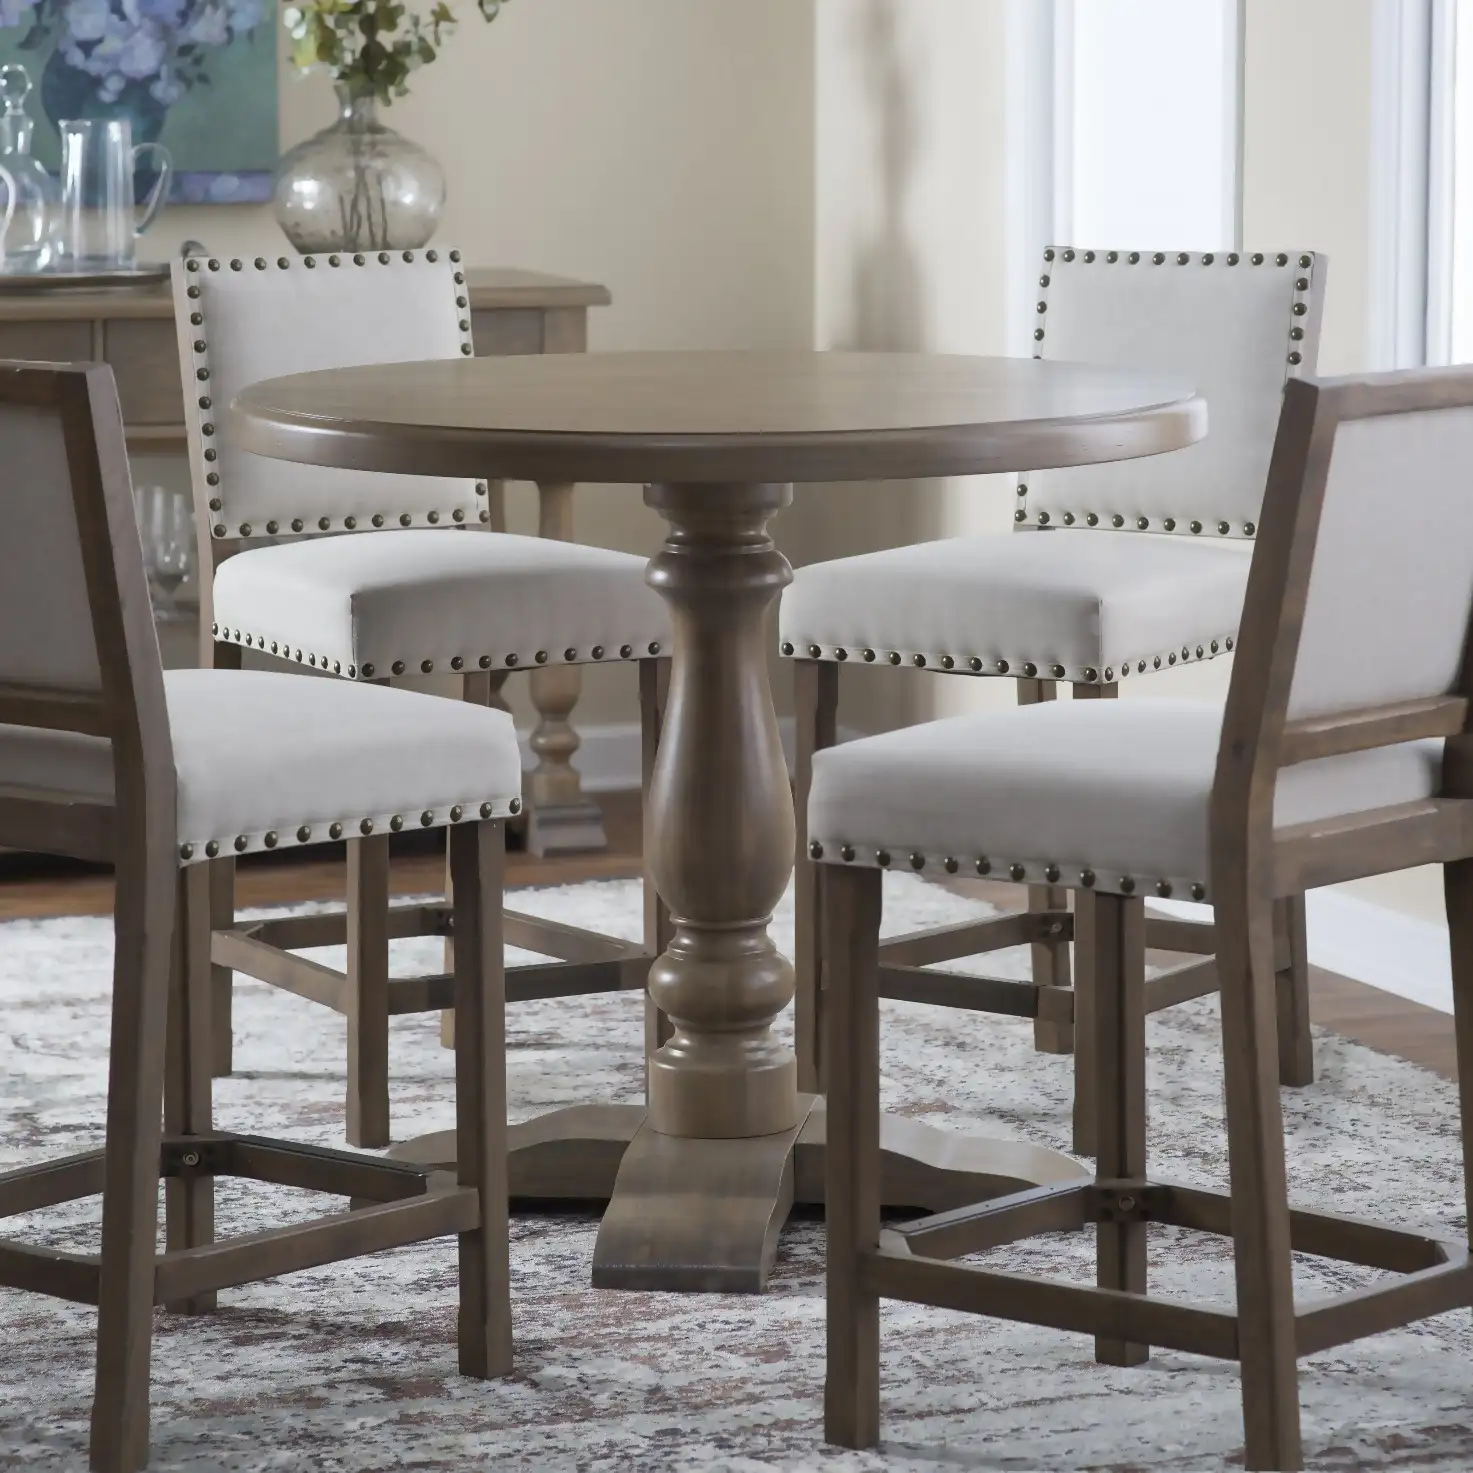 Choose A Functional Table And Chairs